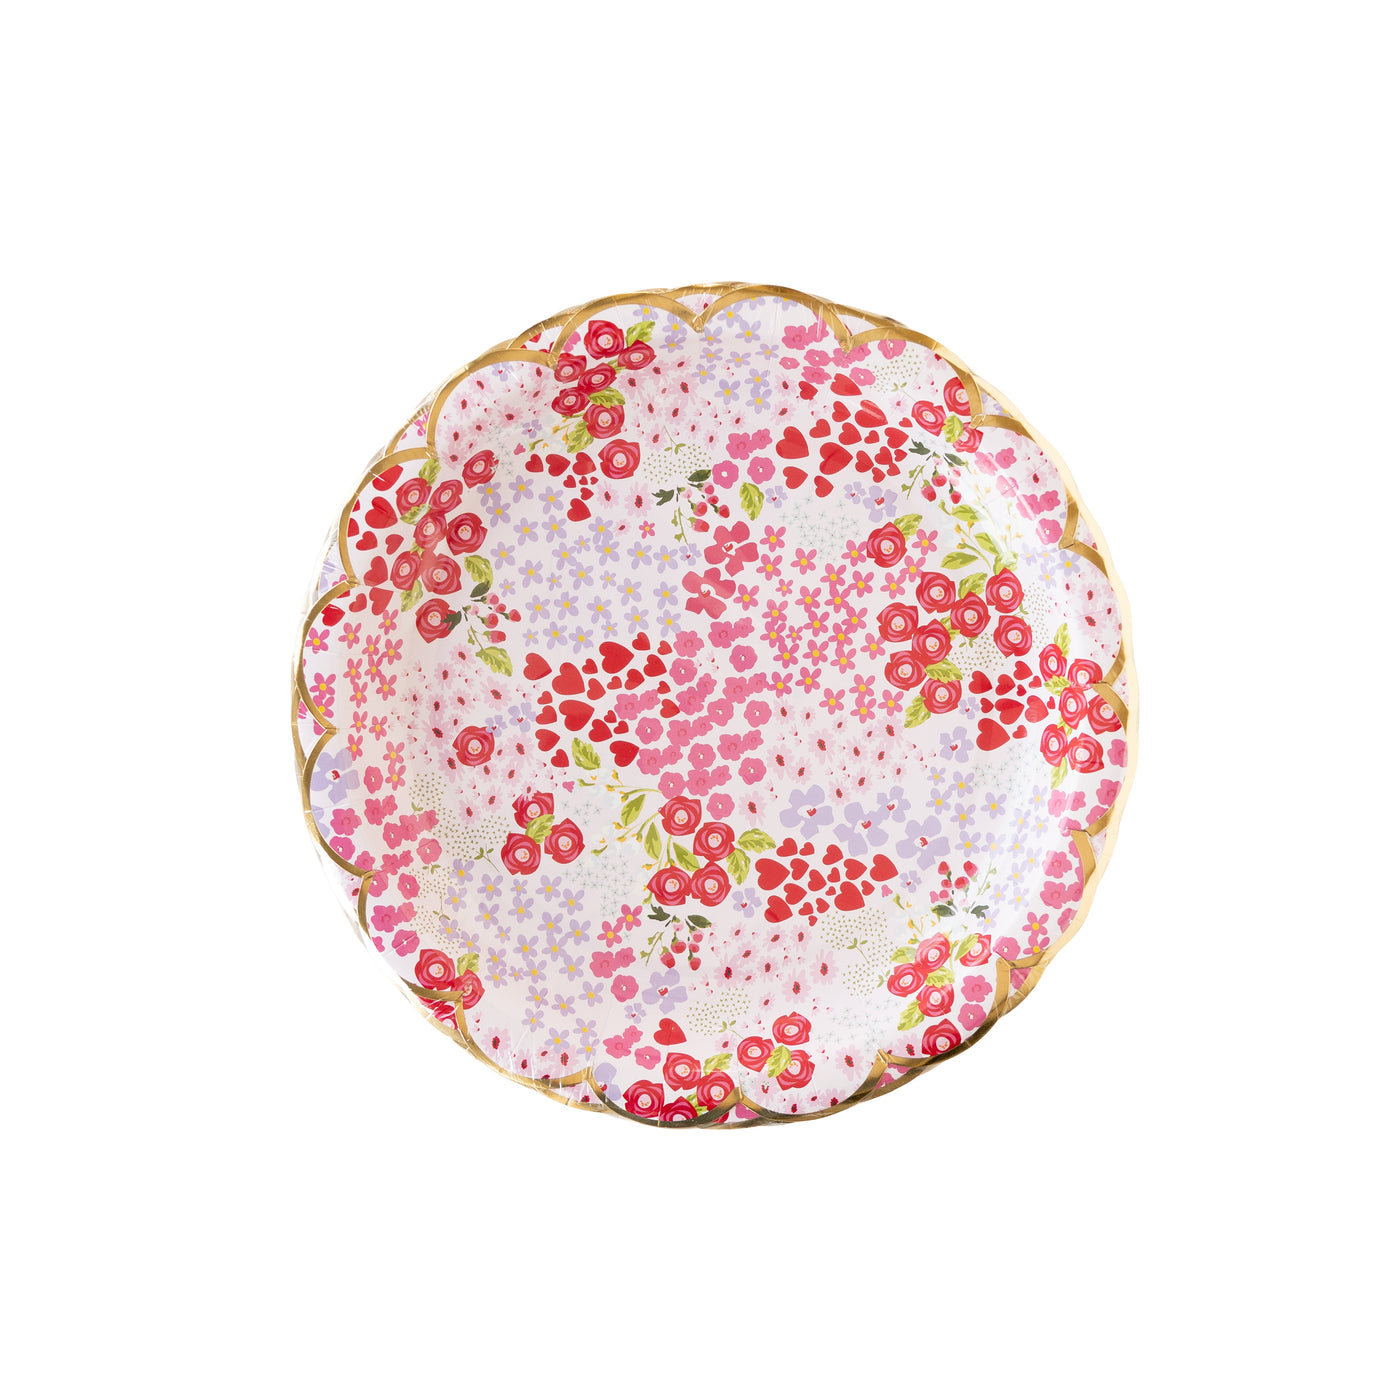 Ditzy Heart & Florals Paper Plate